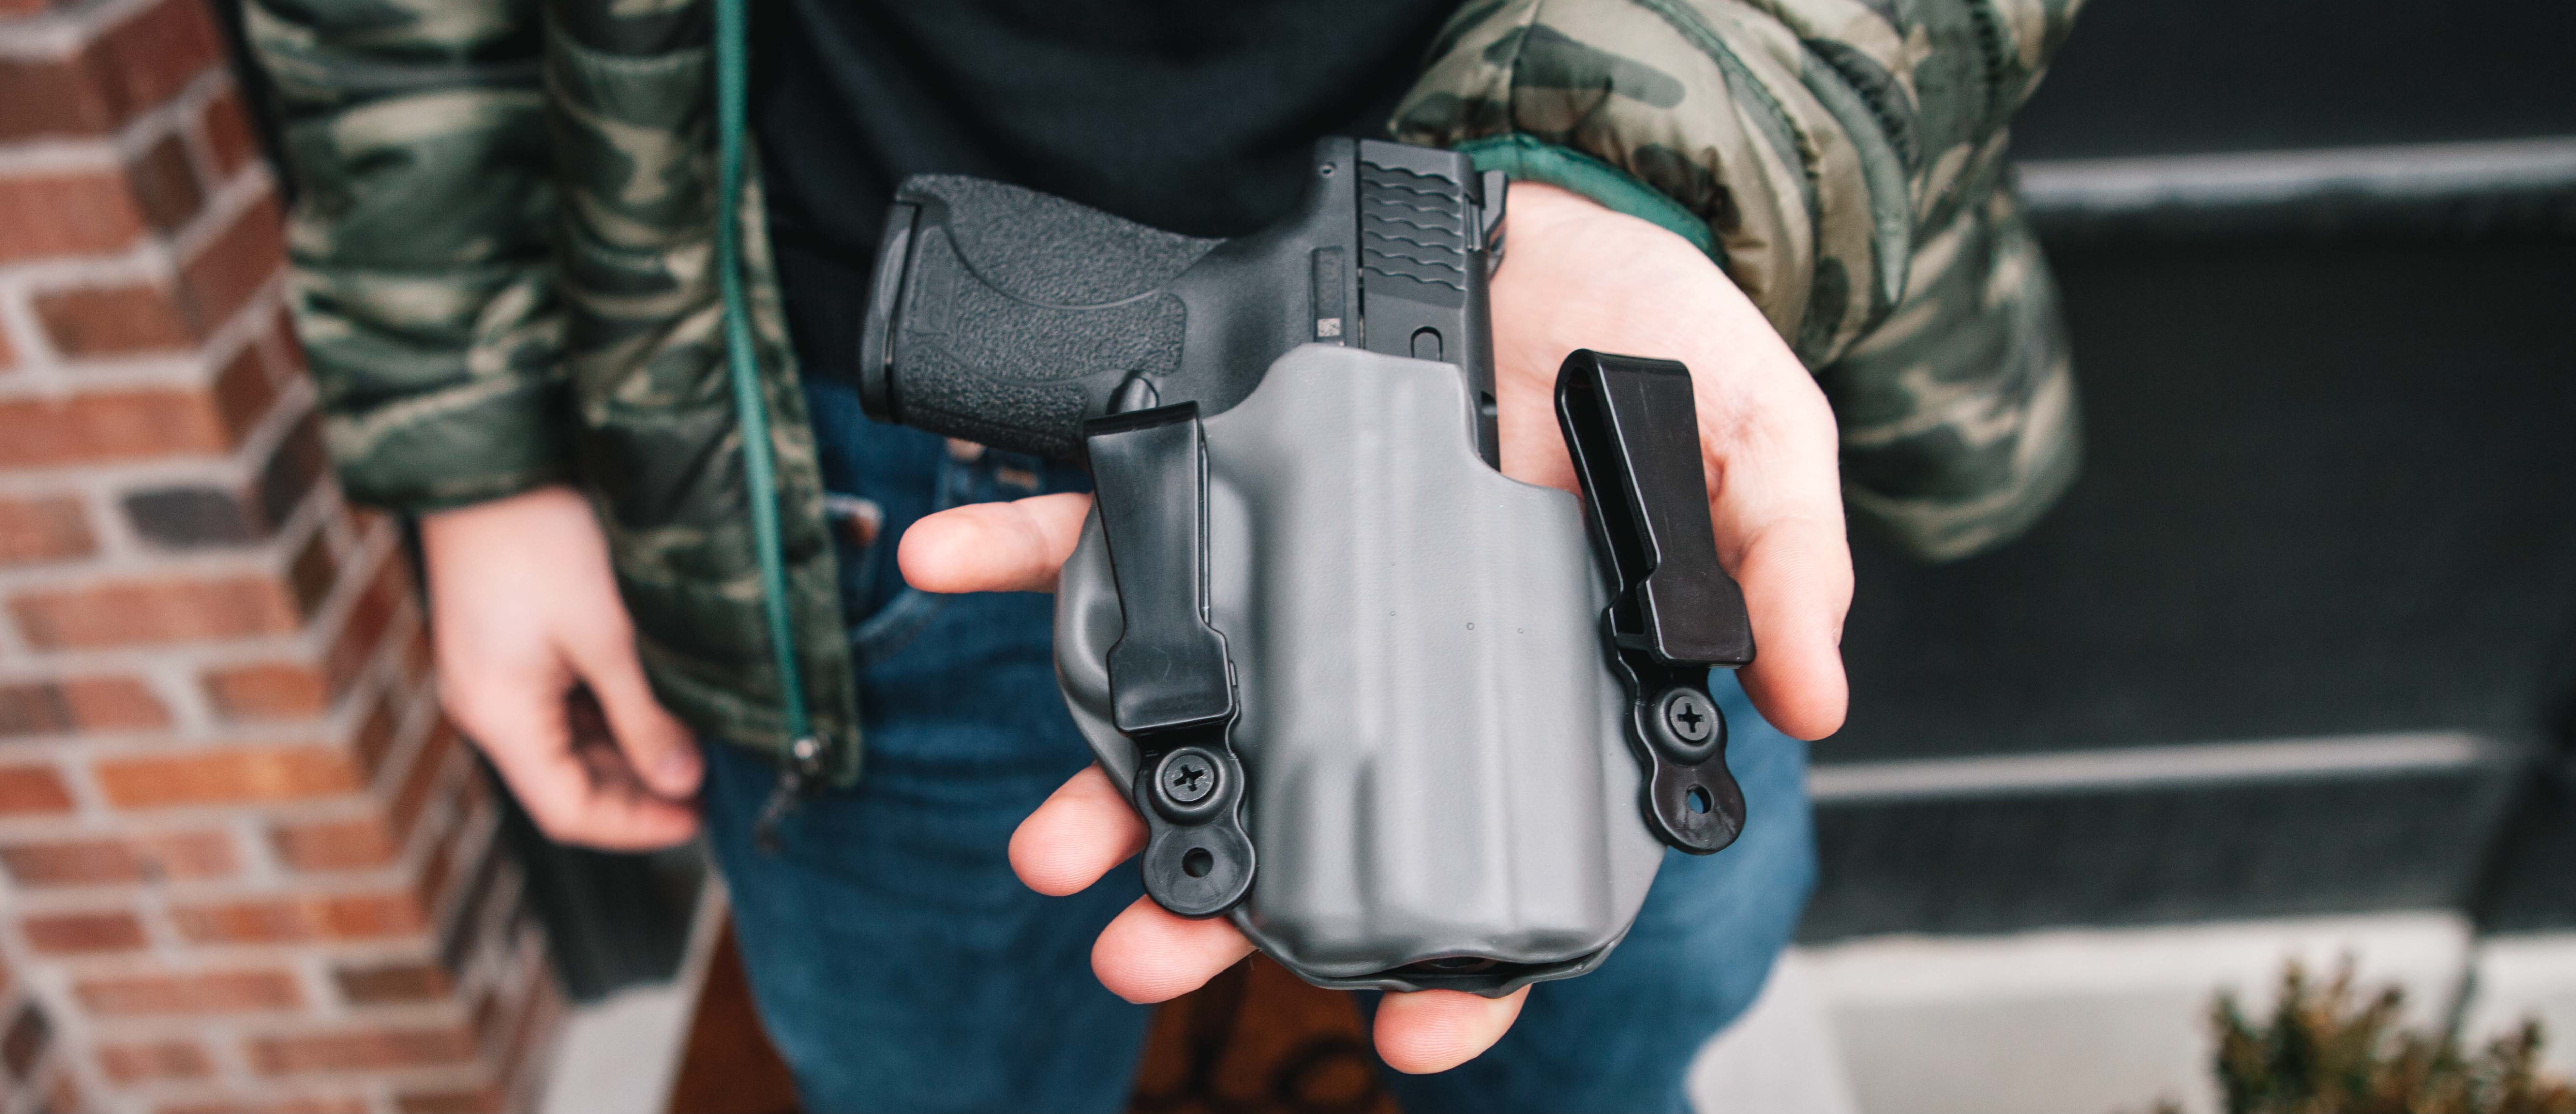 StealthGearUSA Holsters | Premium Concealed Carry Holsters